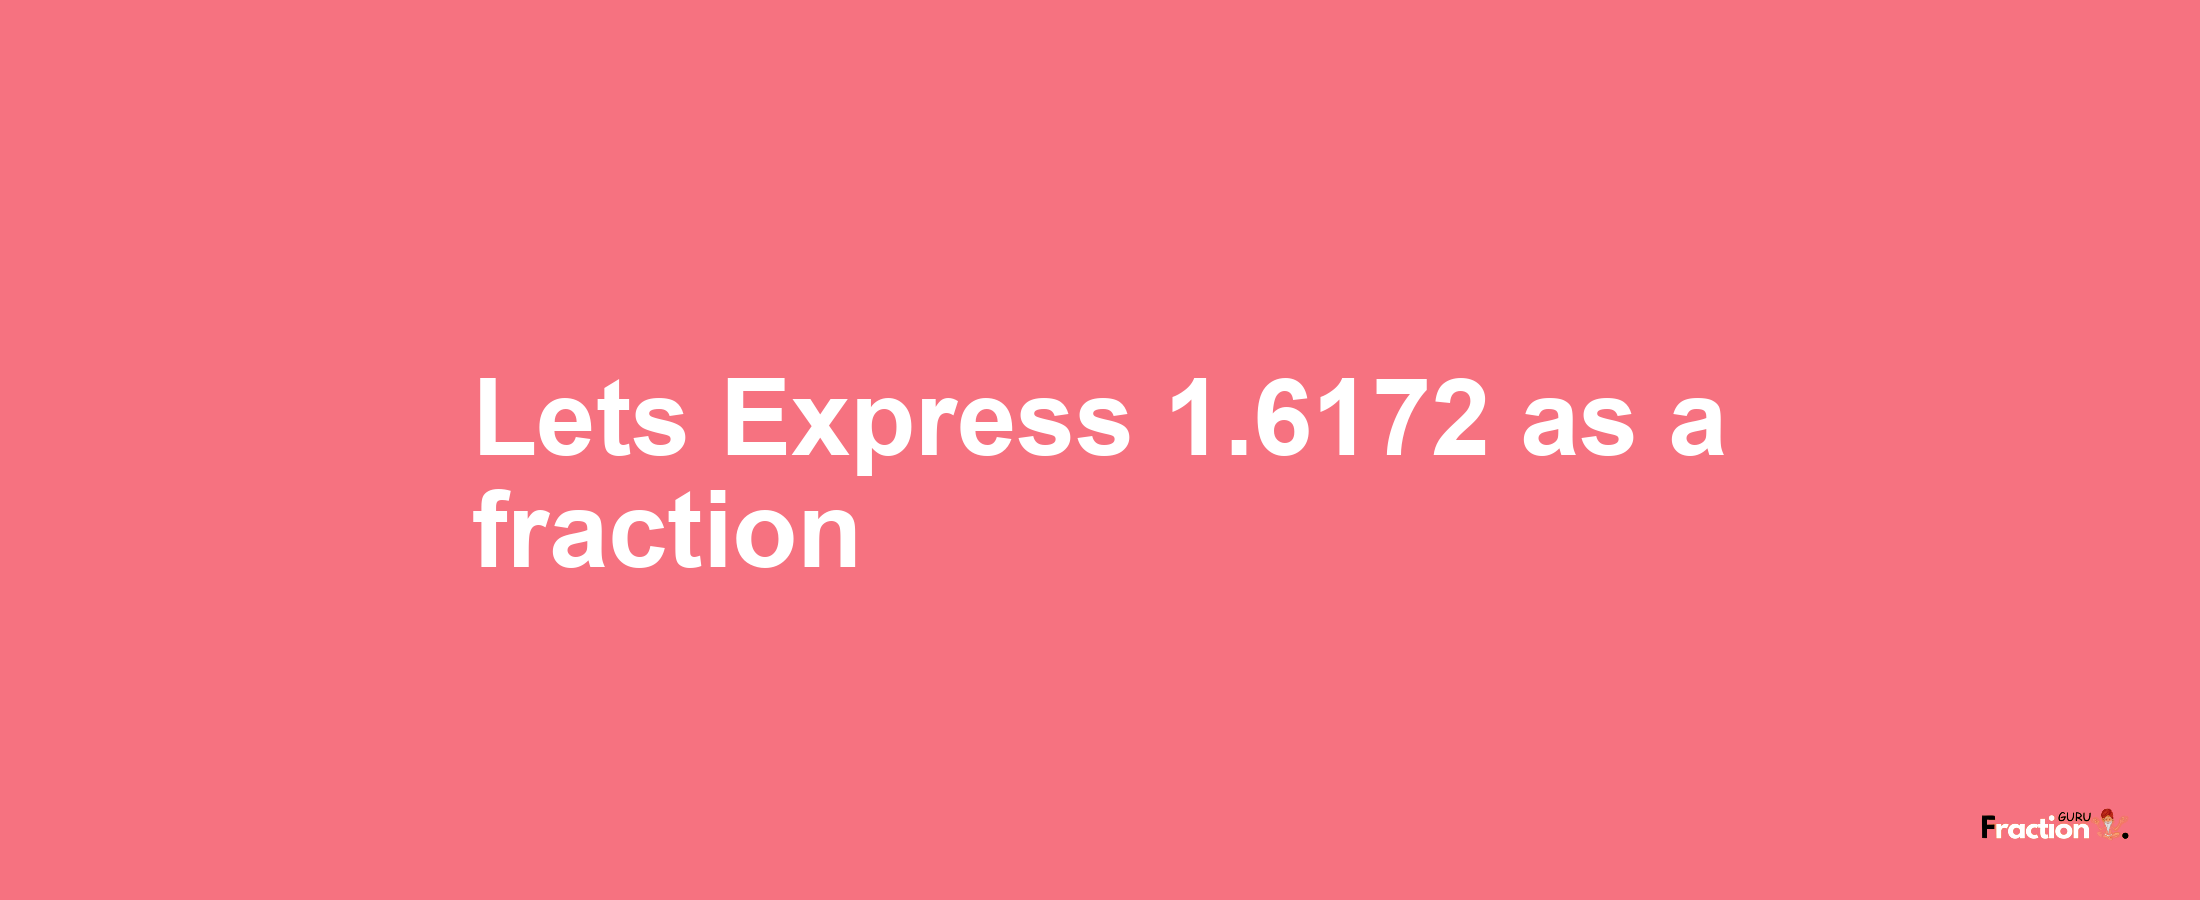 Lets Express 1.6172 as afraction